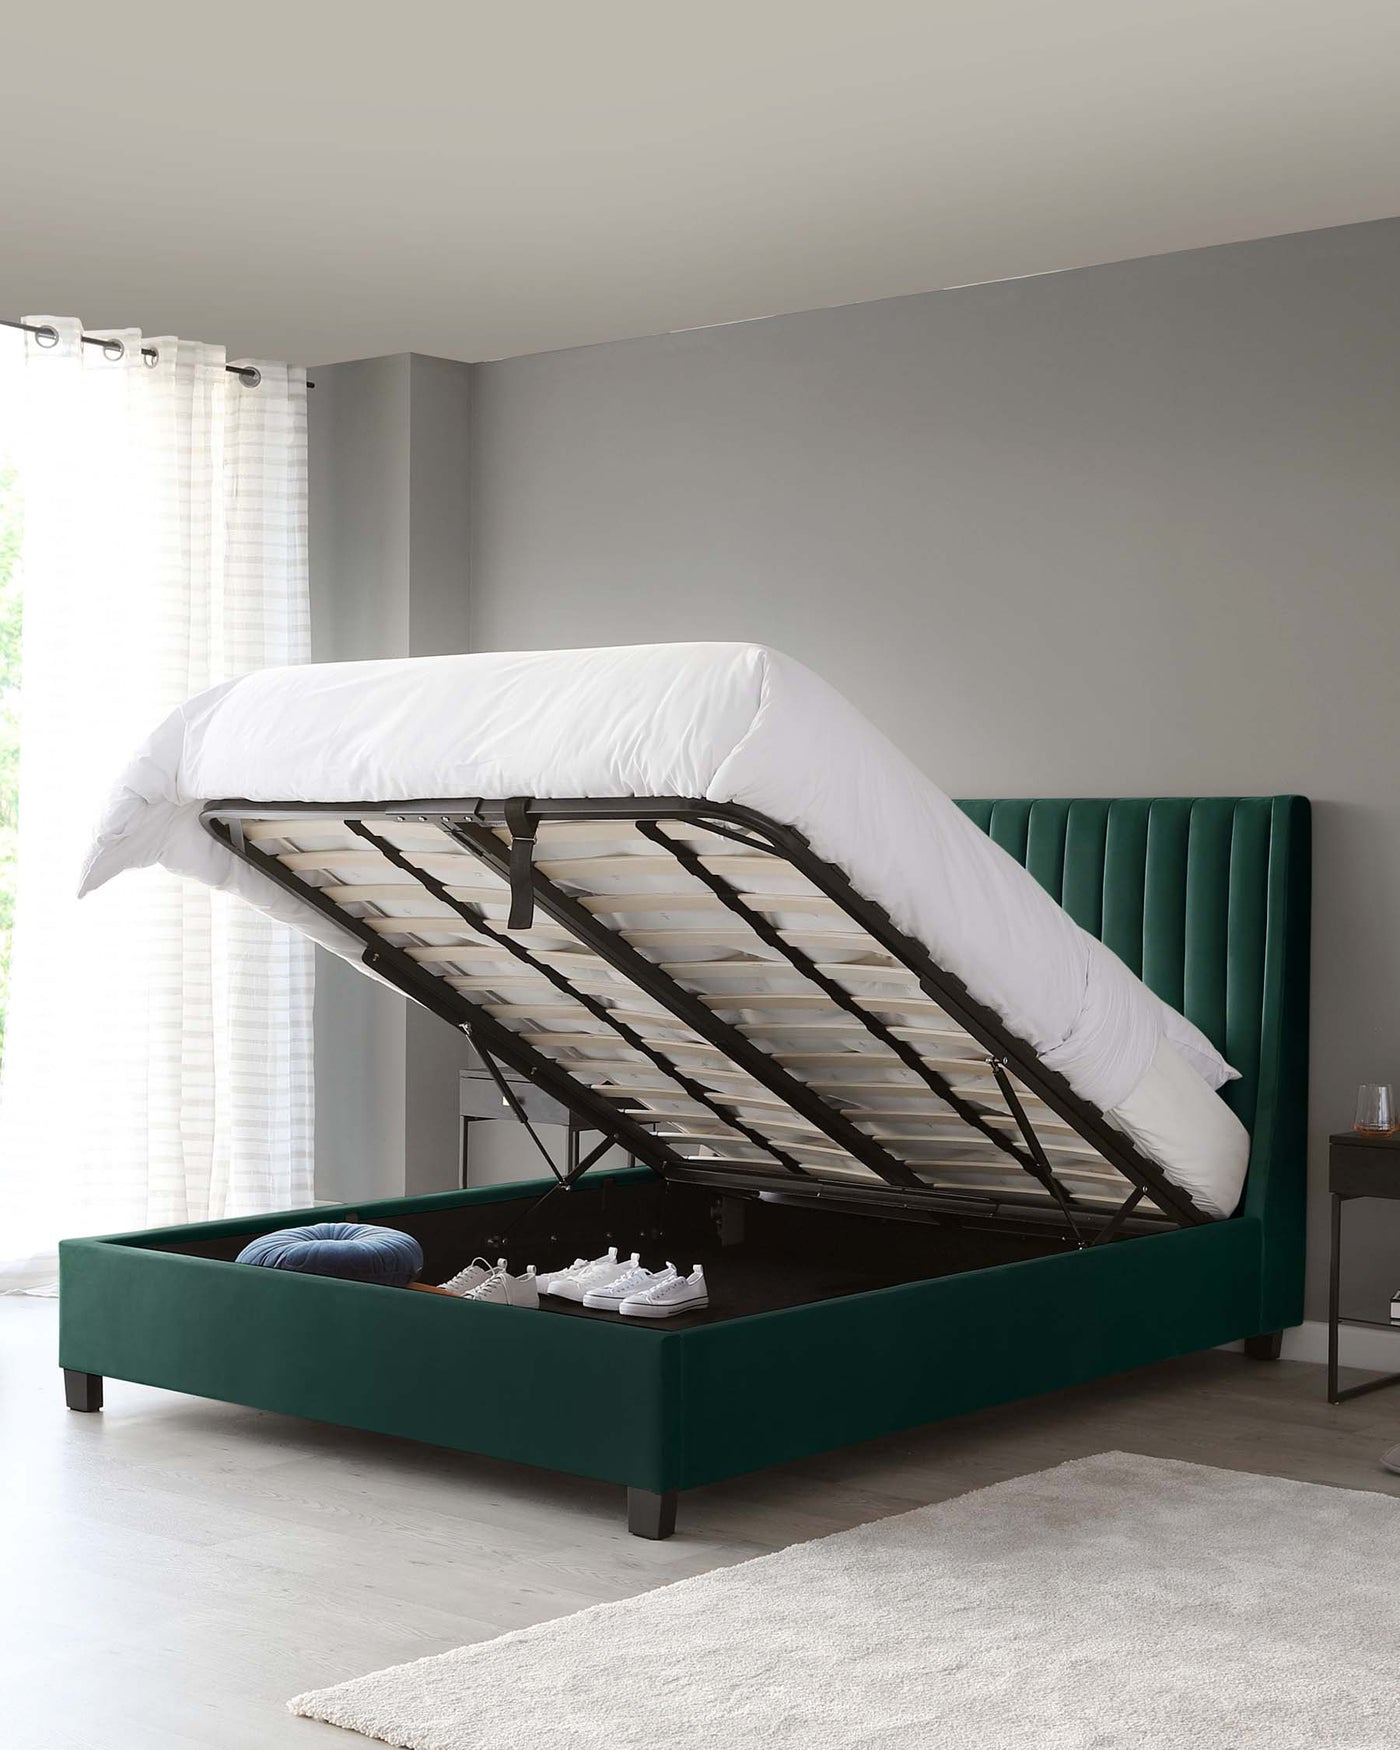 An elegant emerald green upholstered storage bed with a lifted frame revealing a spacious under-mattress compartment. The bed features a tufted, padded headboard and a low-profile foot and side rails on dark wooden legs. A white duvet partly covers the slatted base.